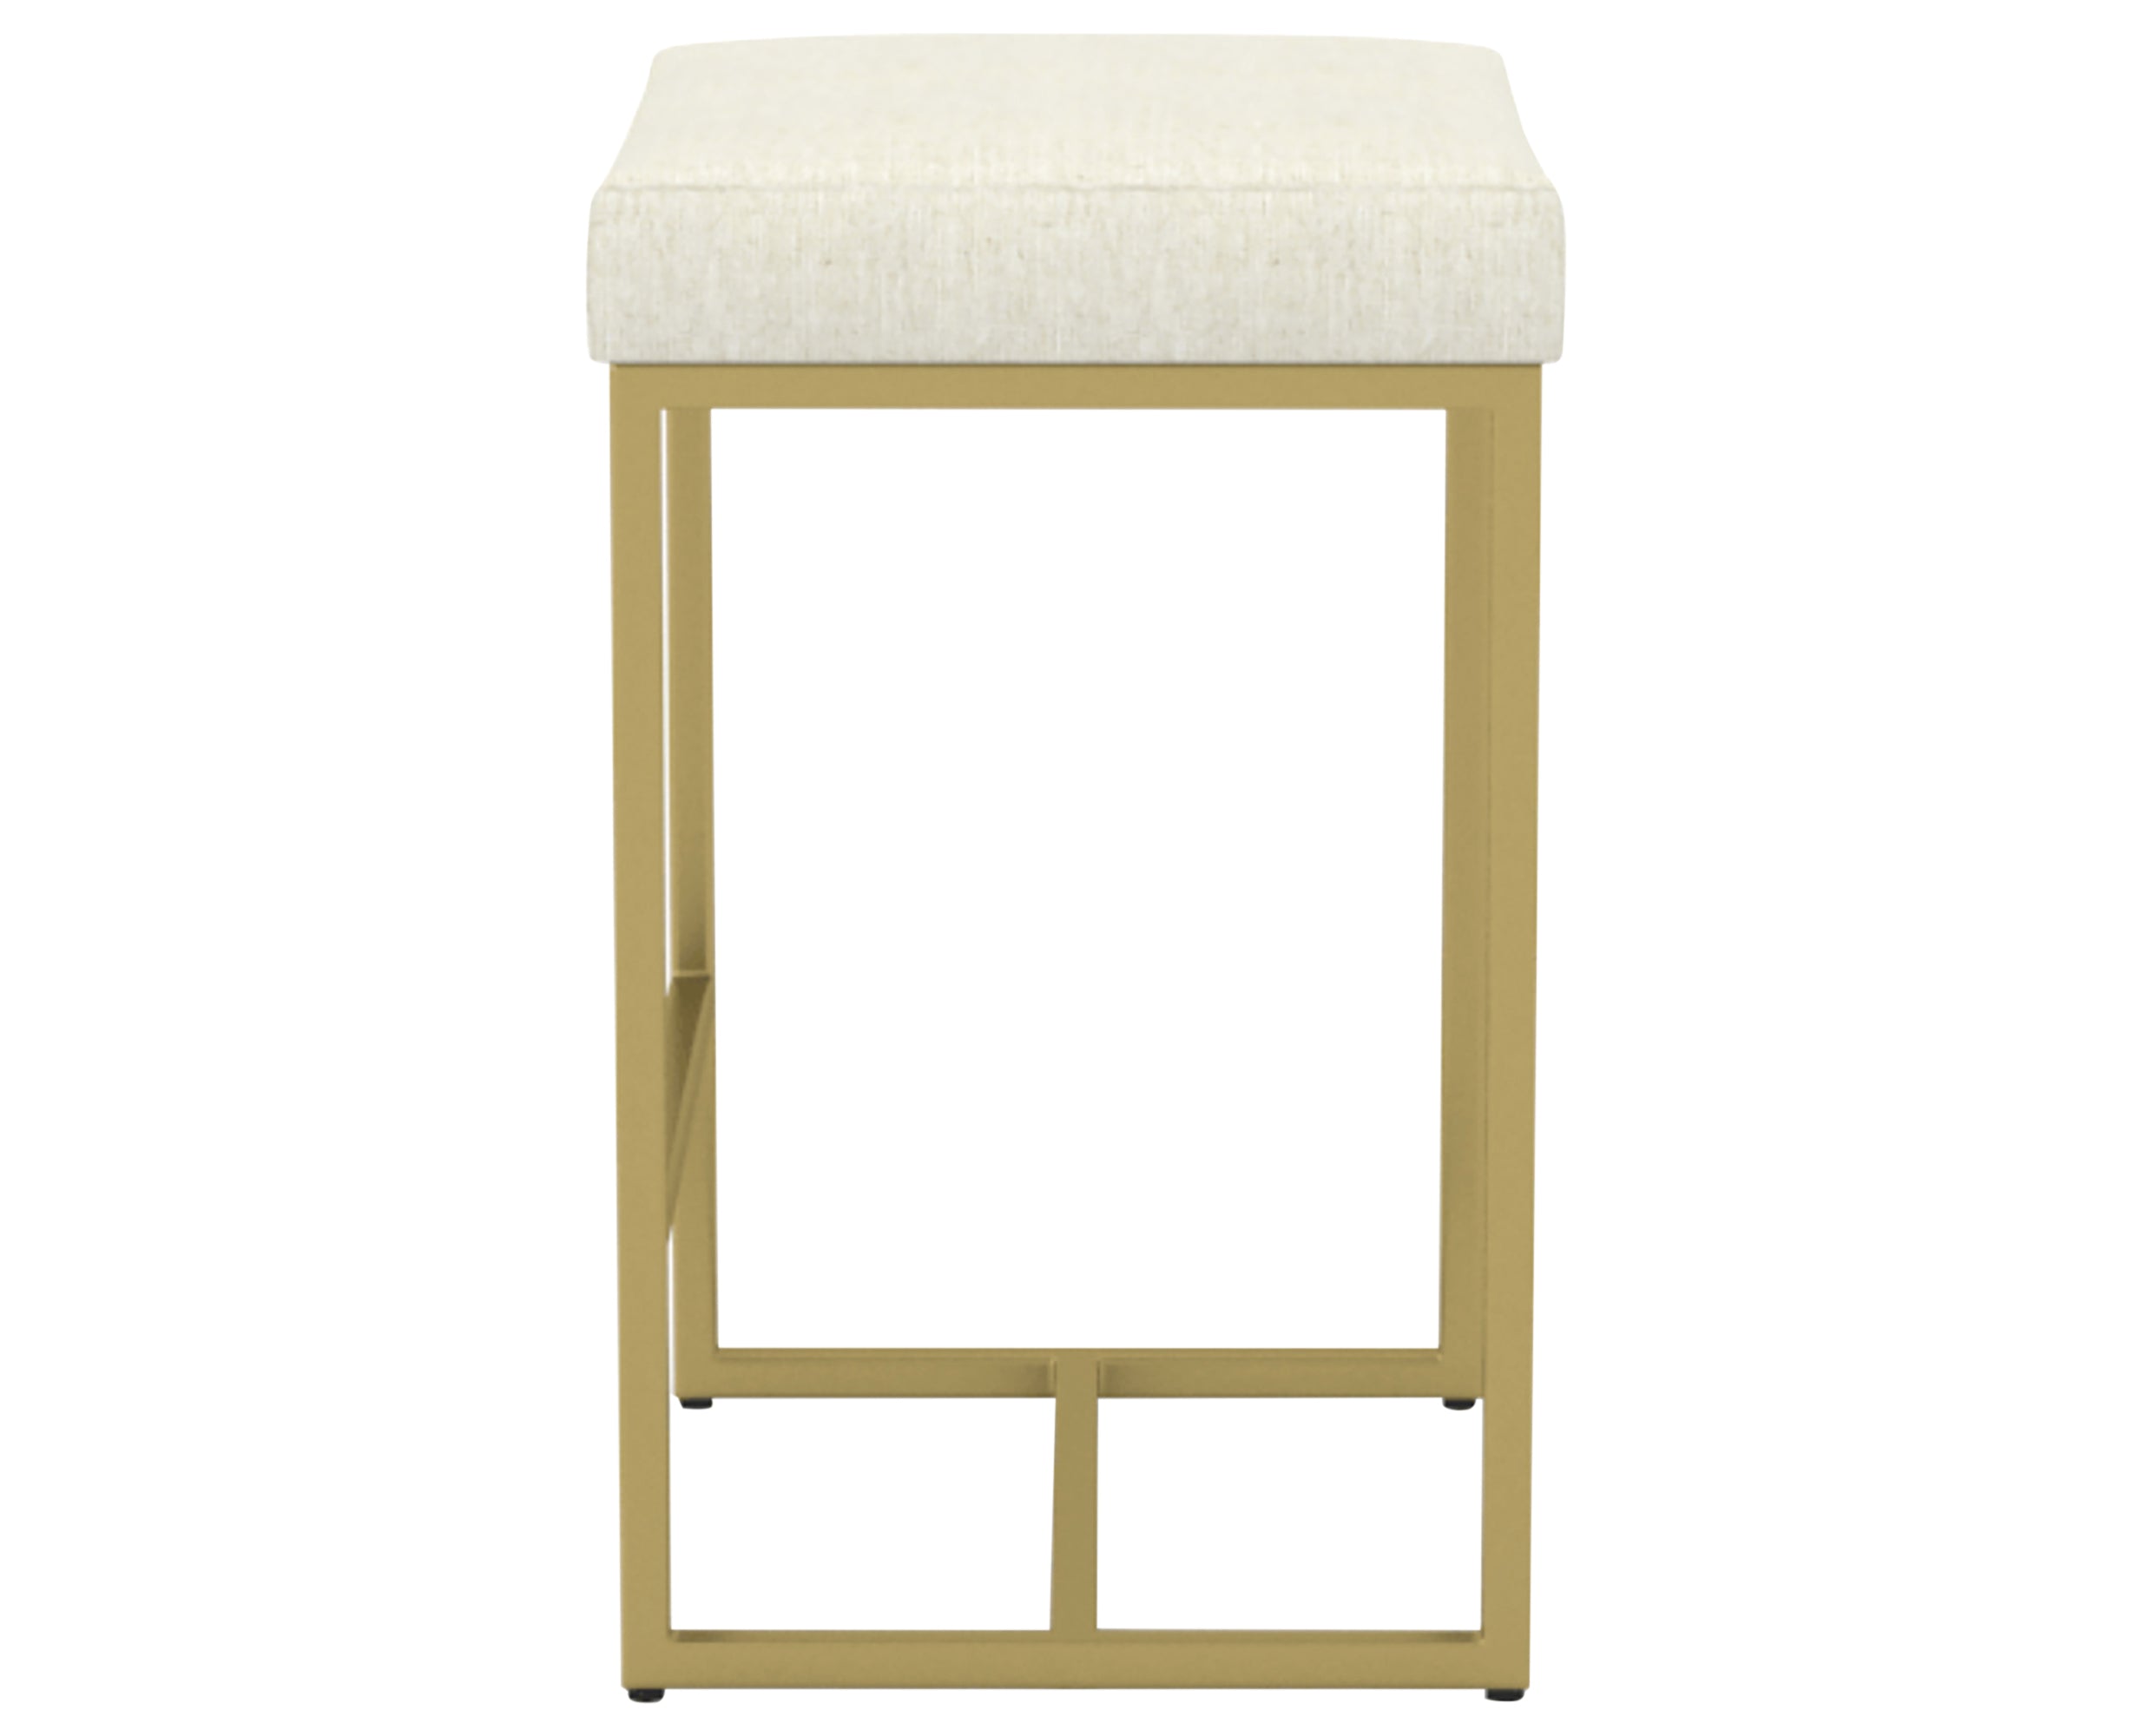 GL Metal Gold &amp; Fabric TW | Canadel Modern Counter Stool 8176 | Valley Ridge Furniture